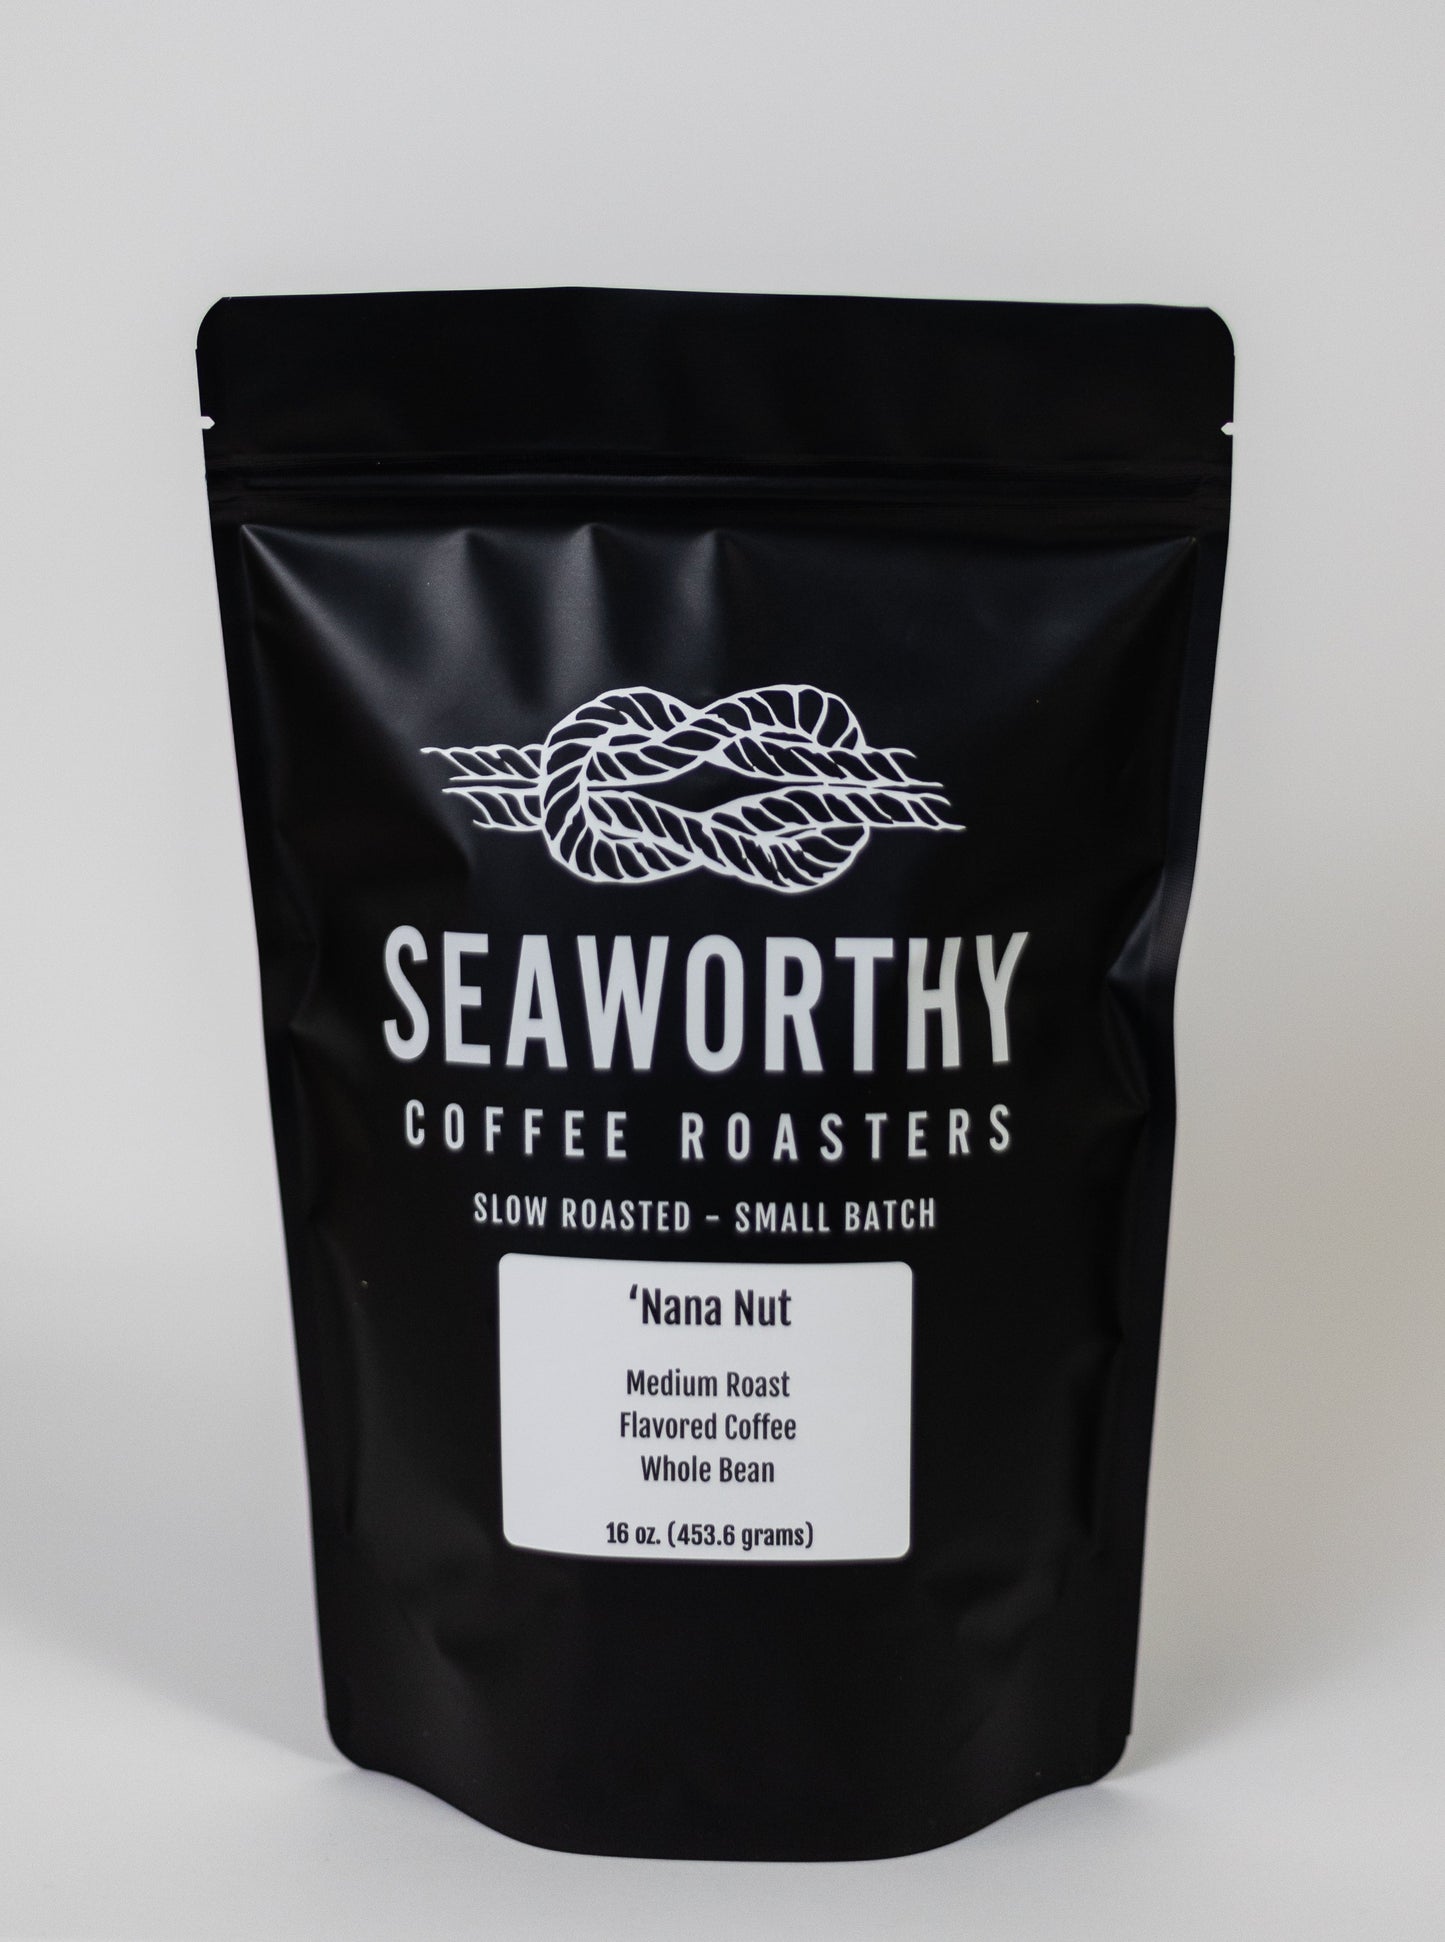 Seaworthy slow roasted, small batch coffee.  The coffee that tastes just like Nana's banana nut bread!  Whether you like your coffee hot or cold, we're sure this one's a winner for all the banana lovers out there.